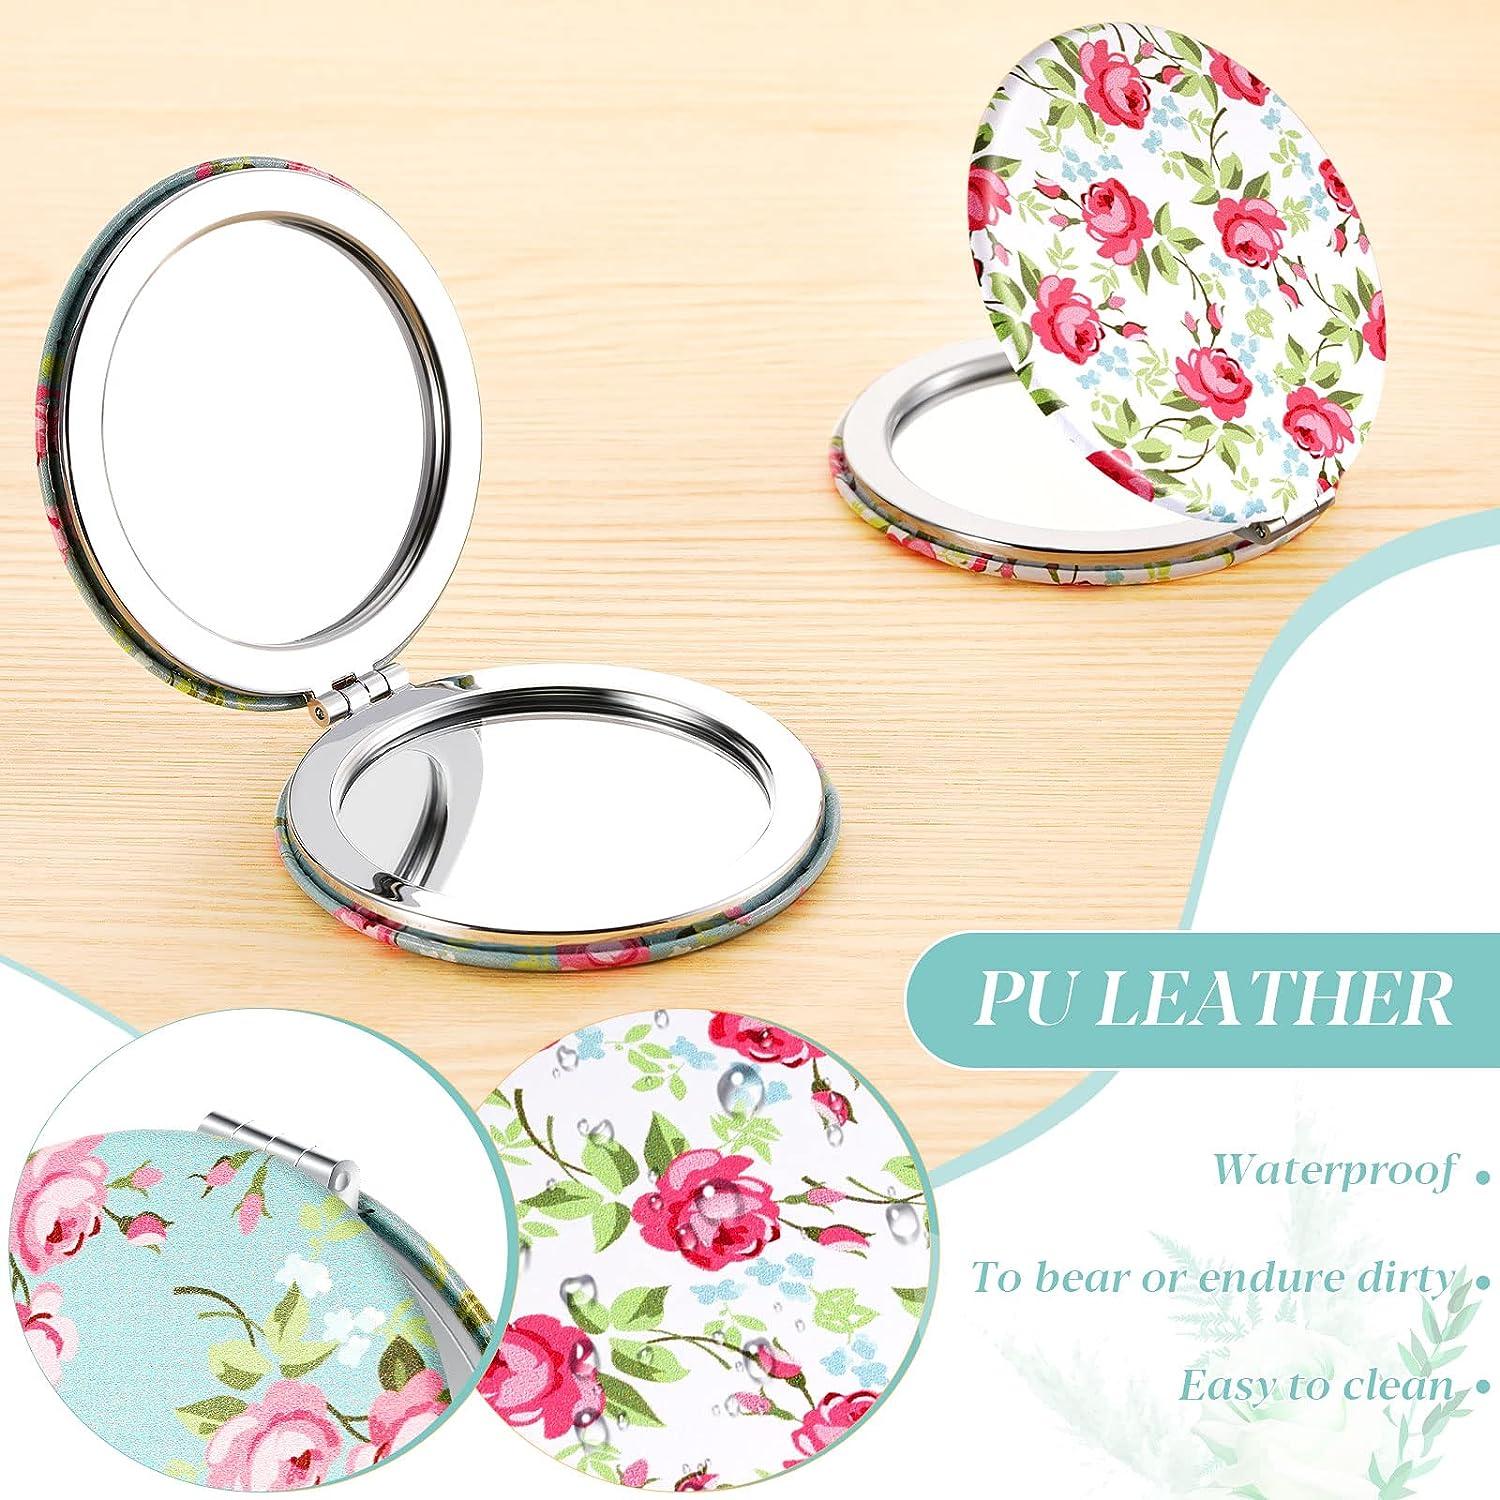 Vicenpal 6 Pieces Pocket Mirrors for Women Small Mini Compact